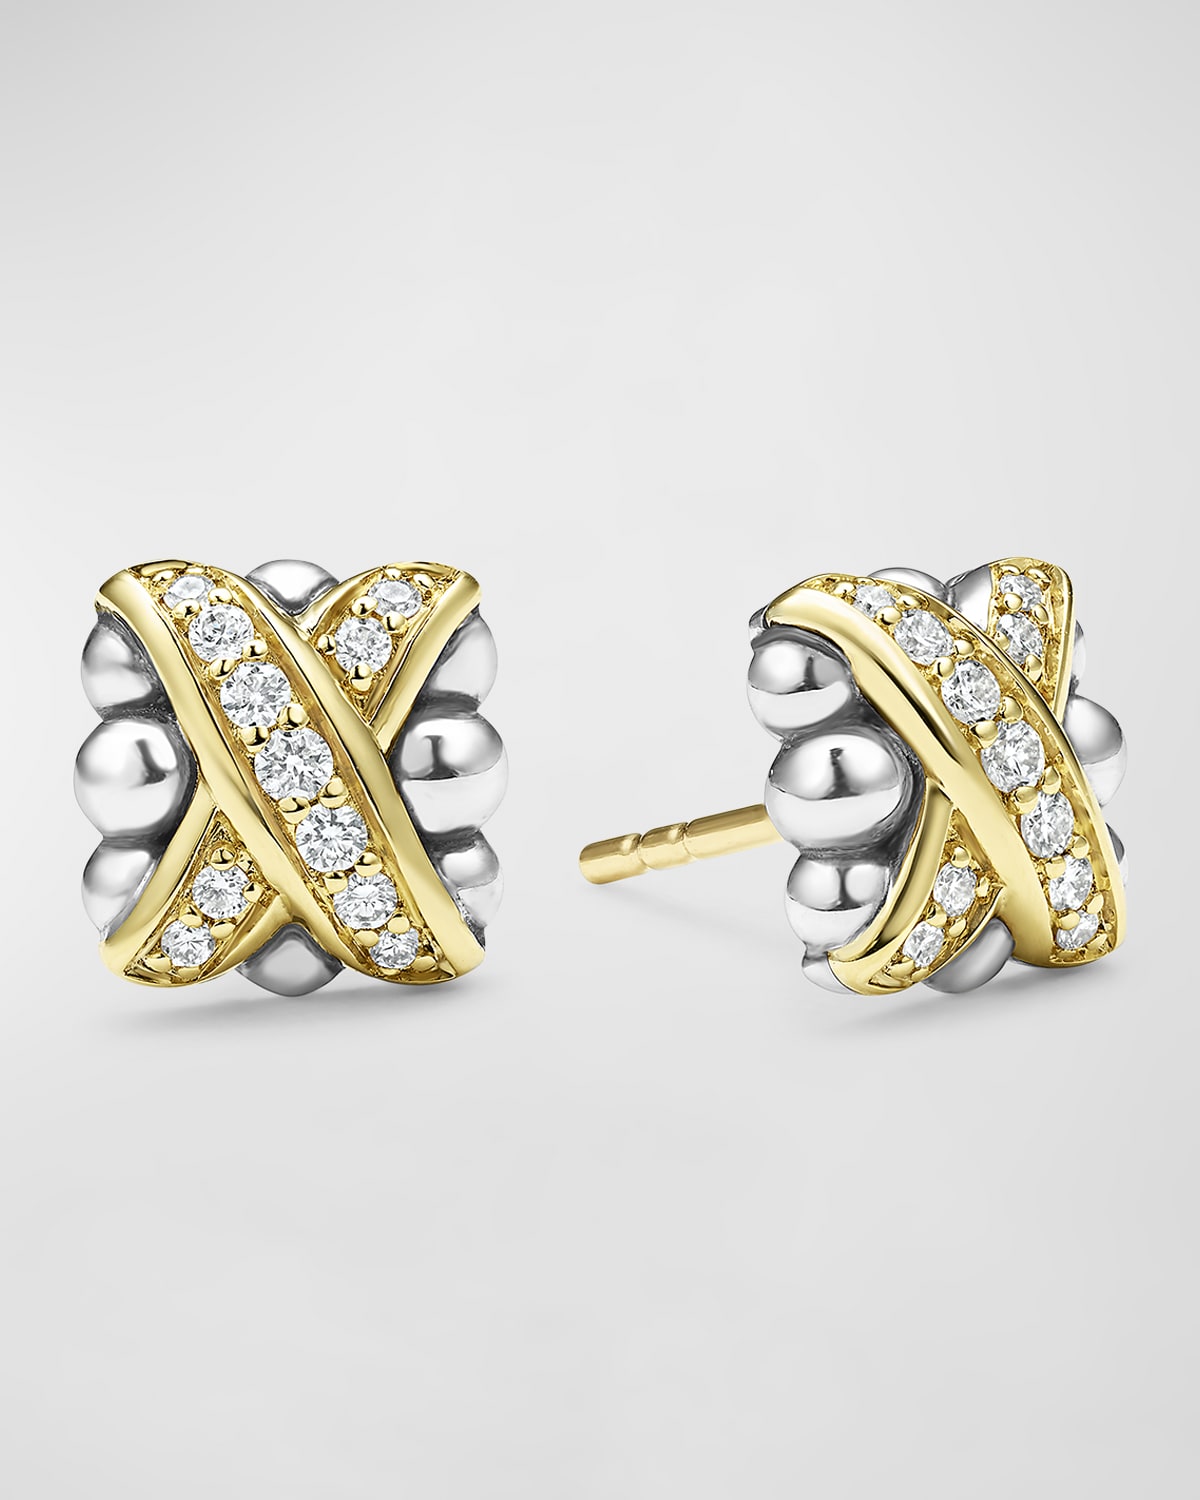 Lagos Embrace Sterling Silver And 18k Gold Diamond Stud Earrings, 8mm